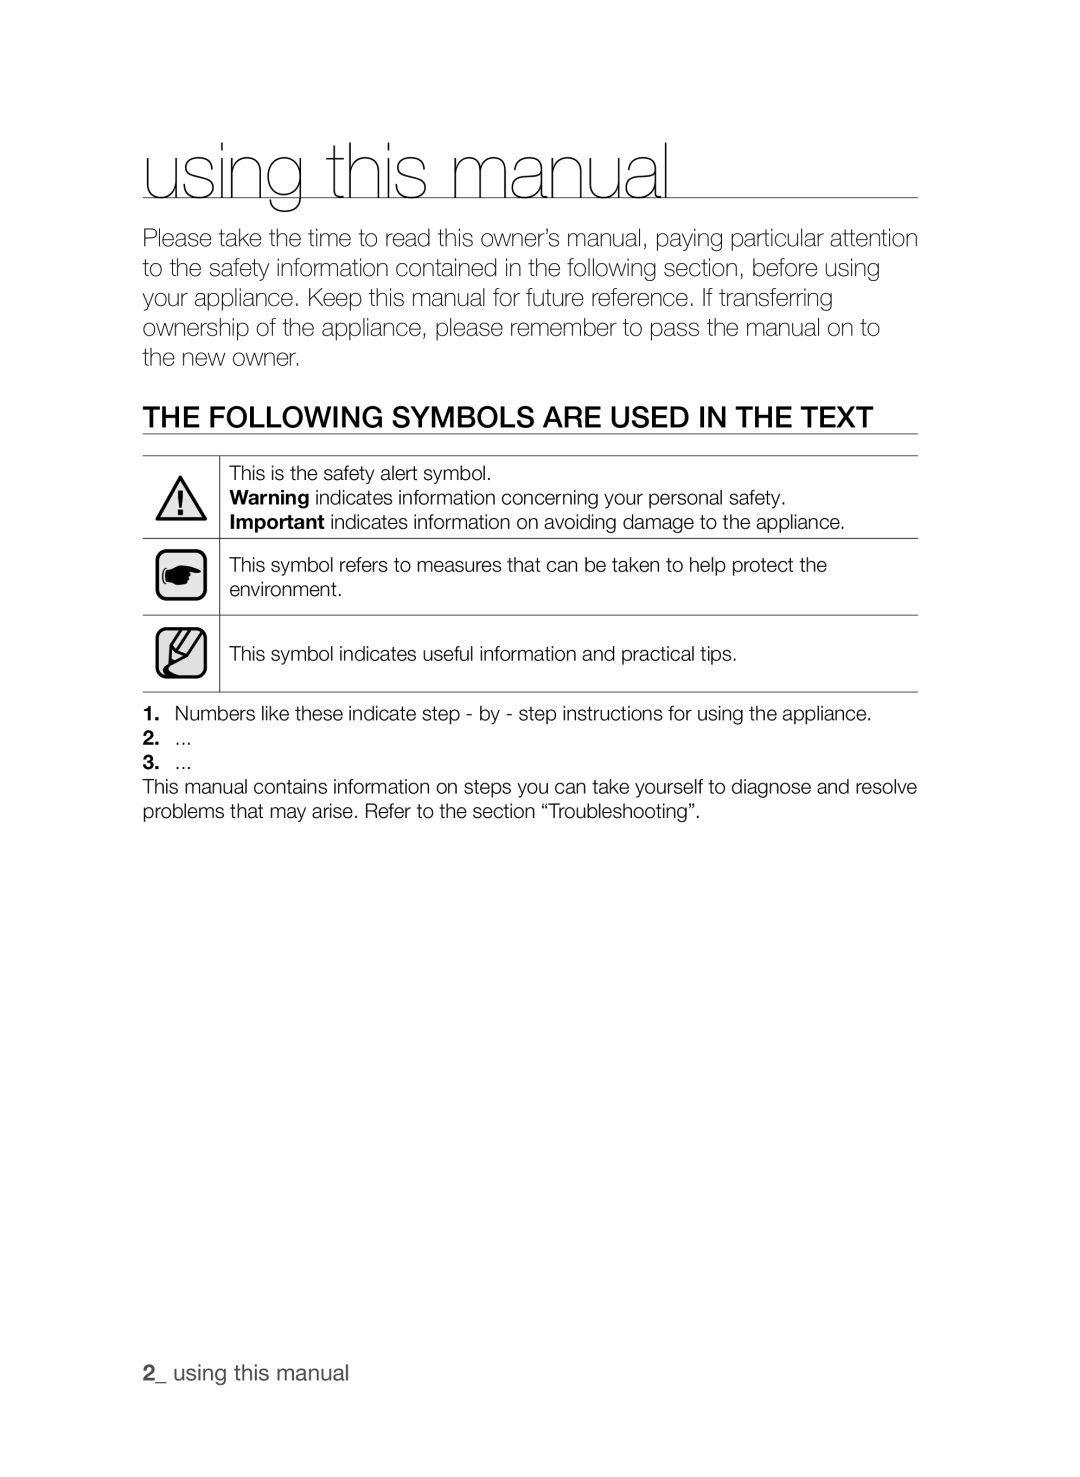 Samsung CTN364D001, CTI613EH user manual using this manual, The following symbols are used in the text 